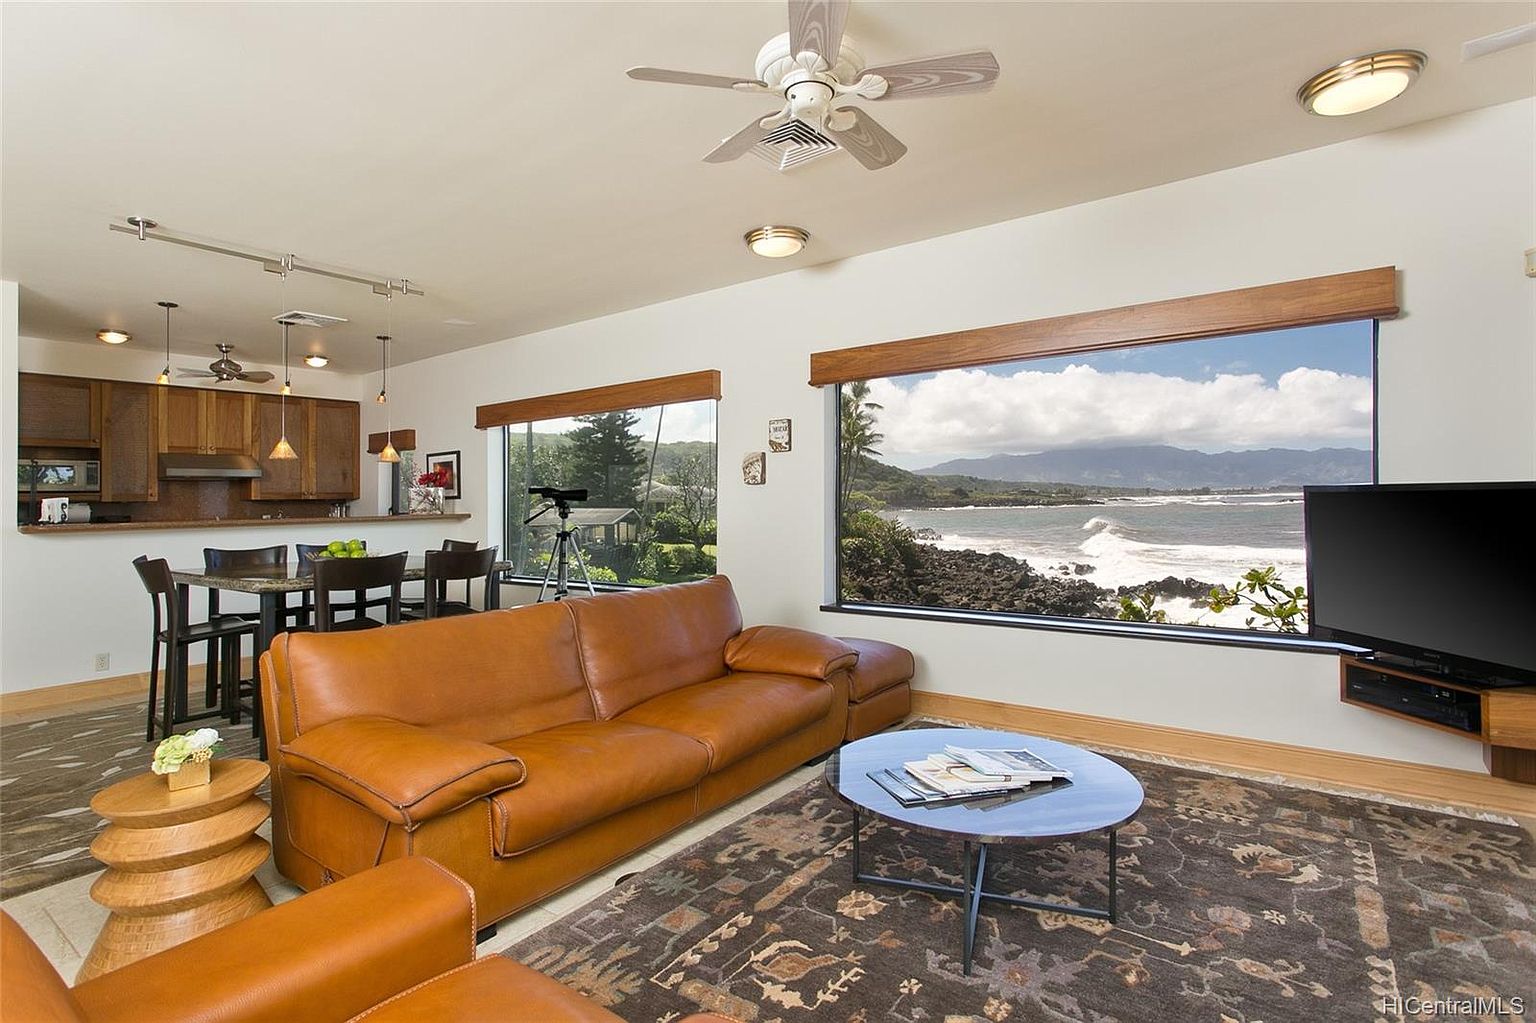 59-779 KAMEHAMEHA HWY, HALEIWA, HI 96612 - $5,100,000 home for sale, house images, photos and pics gallery